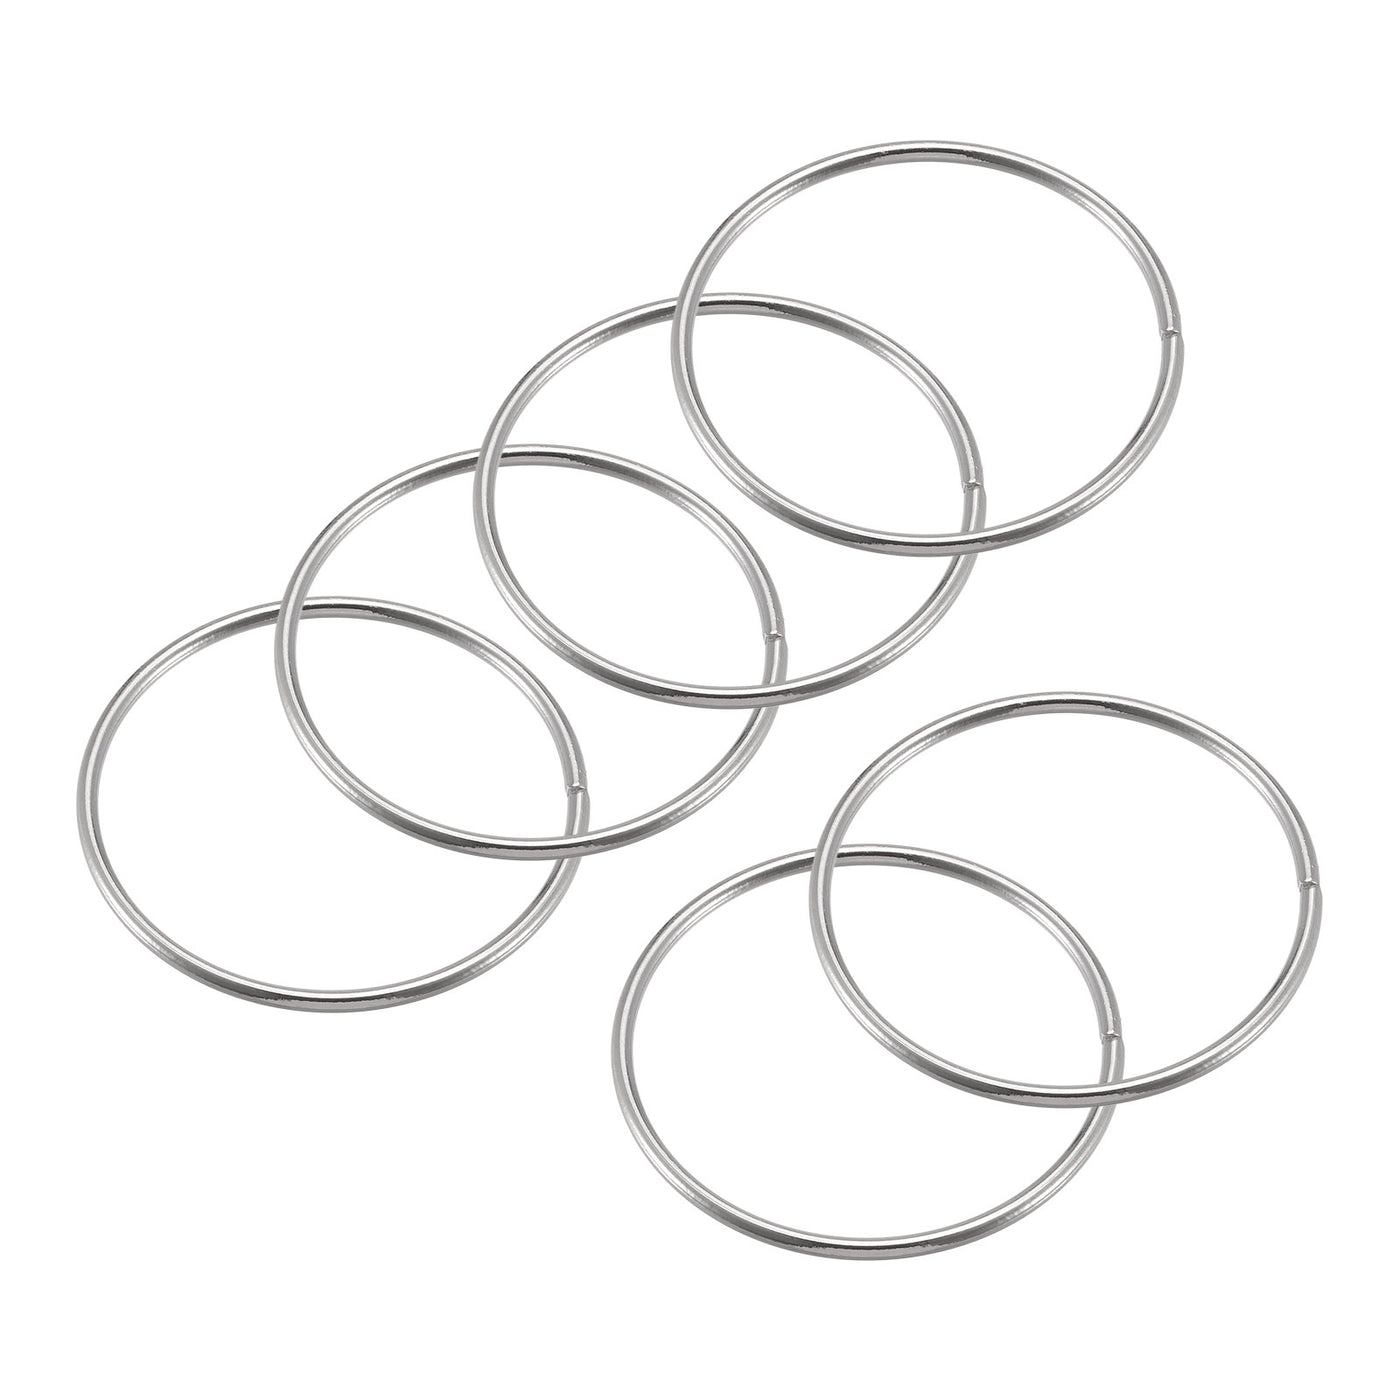 uxcell Uxcell 60mm(2.36") OD Metal O Ring Non-Welded Craft Hoops for DIY Silver Tone 10pcs